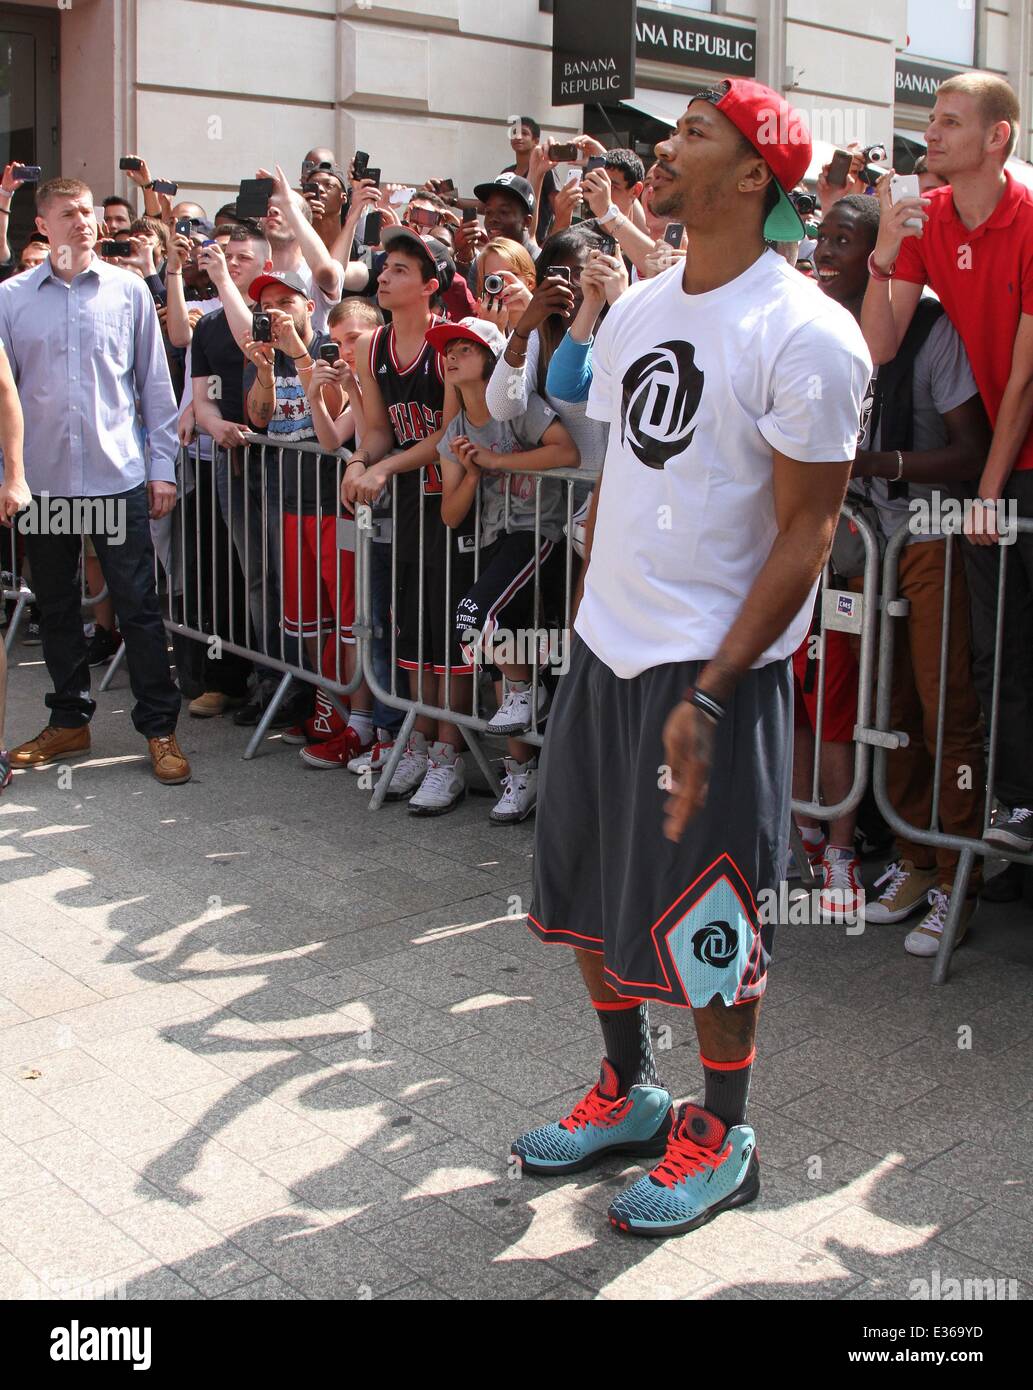 Competencia Hacer un nombre atravesar Chicago Bulls player Derrick Rose attends an in-store Adidas promotional  event near Champs Elysees Featuring: Derrick Rose Where: Paris, France  When: 13 Jul 2013 **Not available for publication in France, Netherlands,  Belgium,